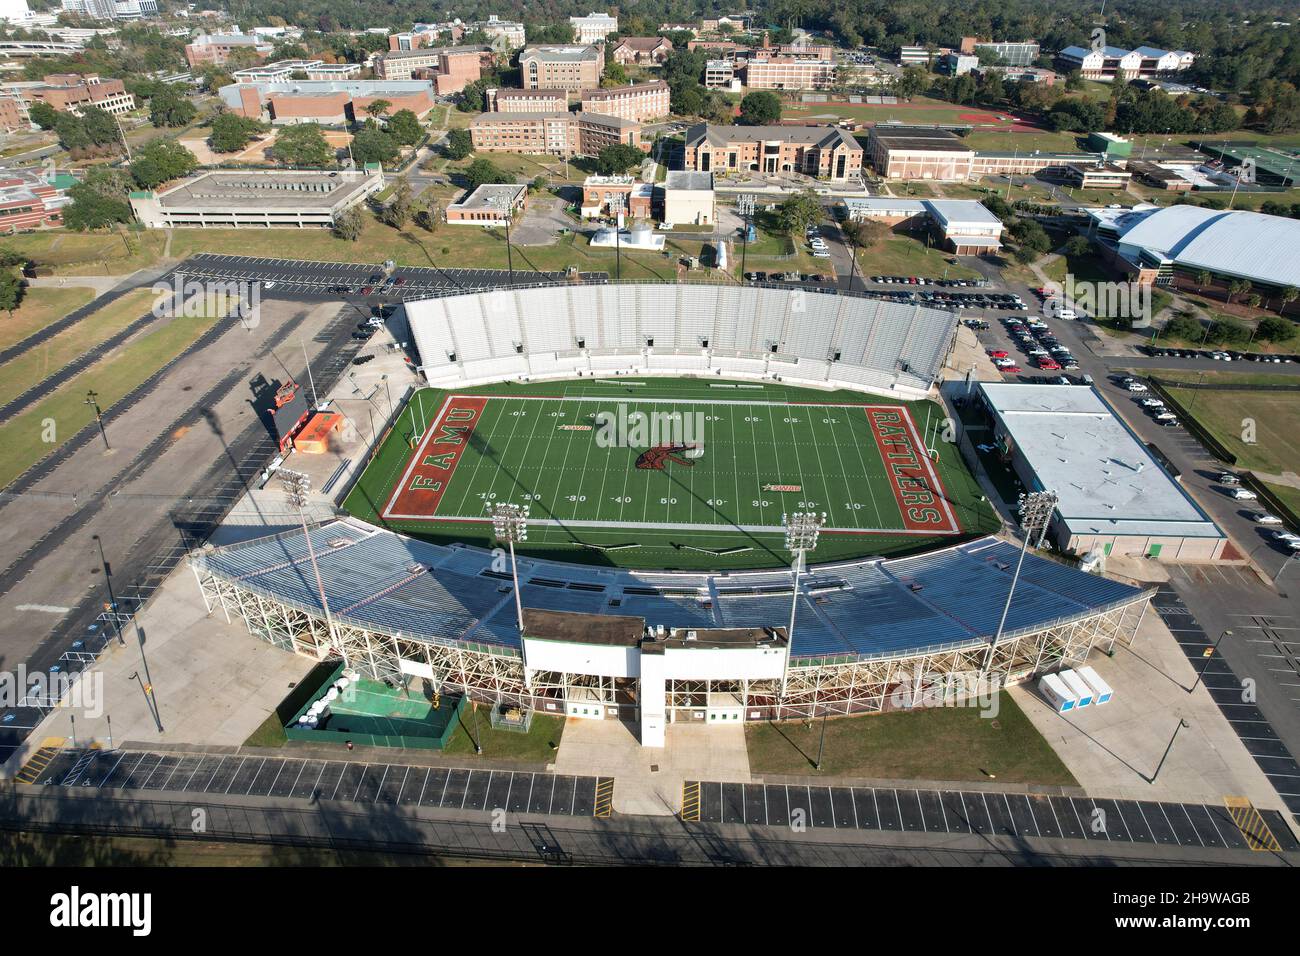 An aerial view of Bragg Memorial Stadium on the campus of Florida A&M University, Saturday, Nov. 20, 2021, in Tallahassee, Fla. The stadium, named aft Stock Photo